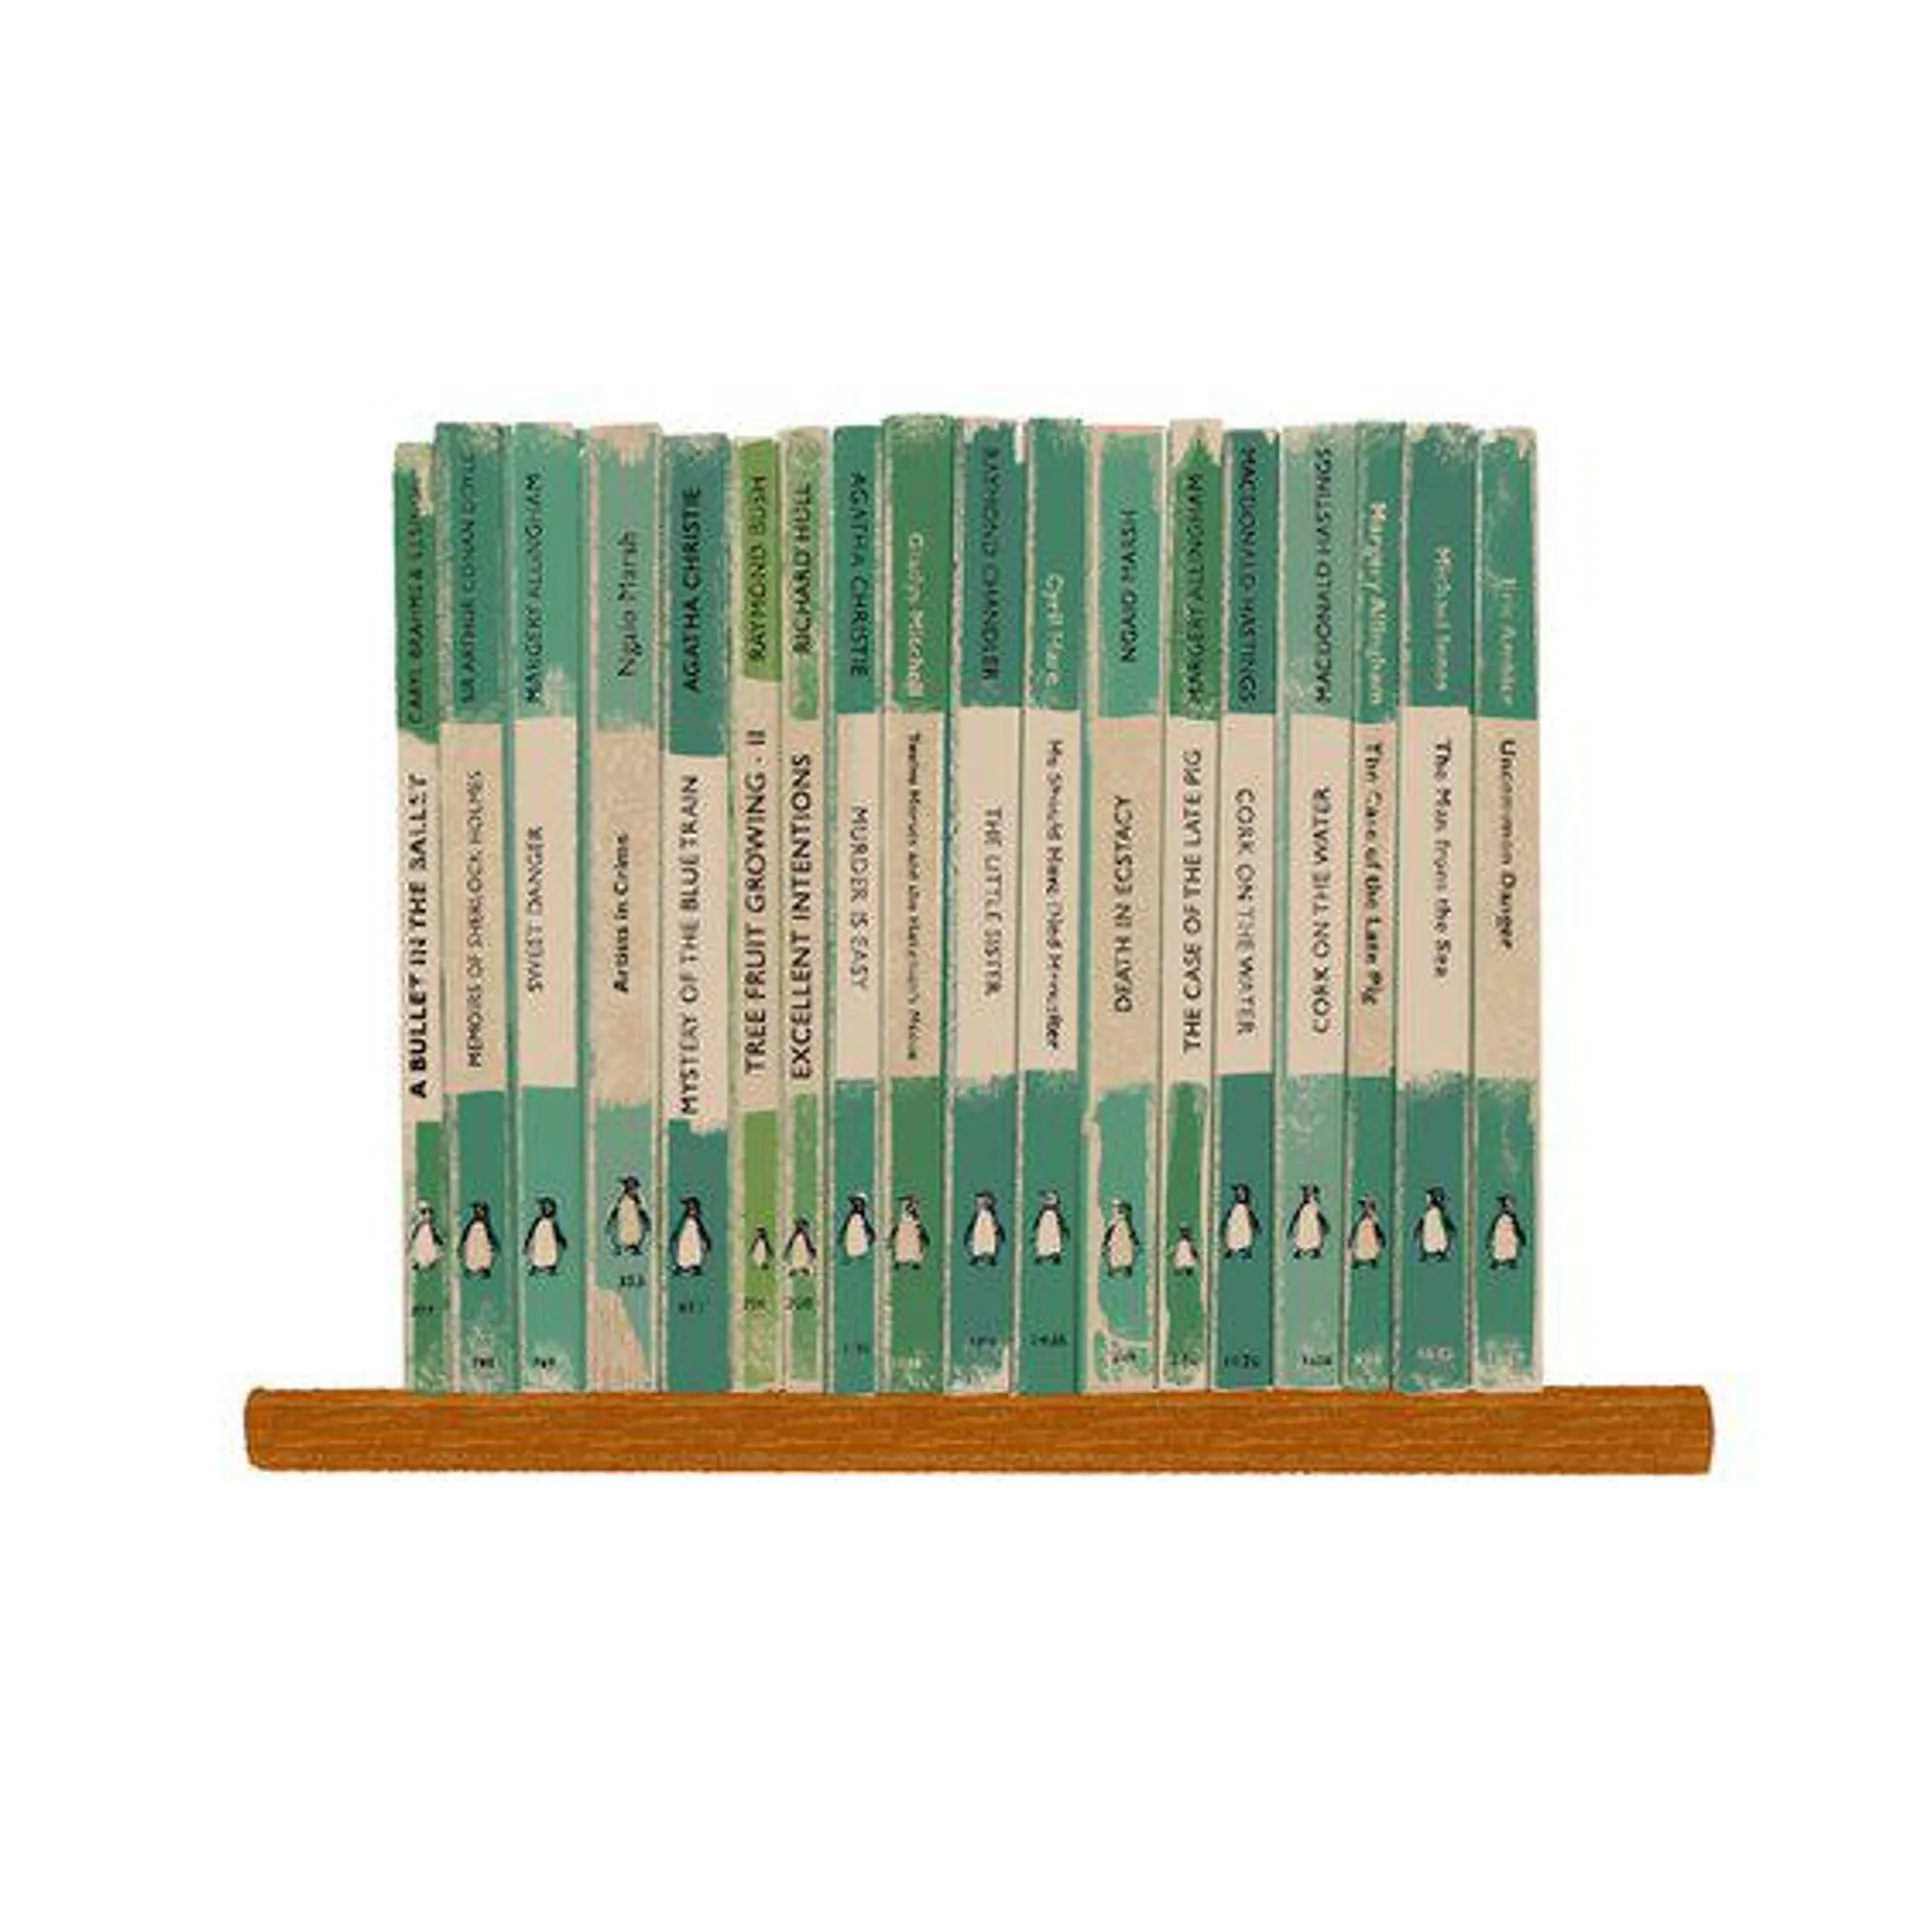 Penguin Green book collection, limited-edition